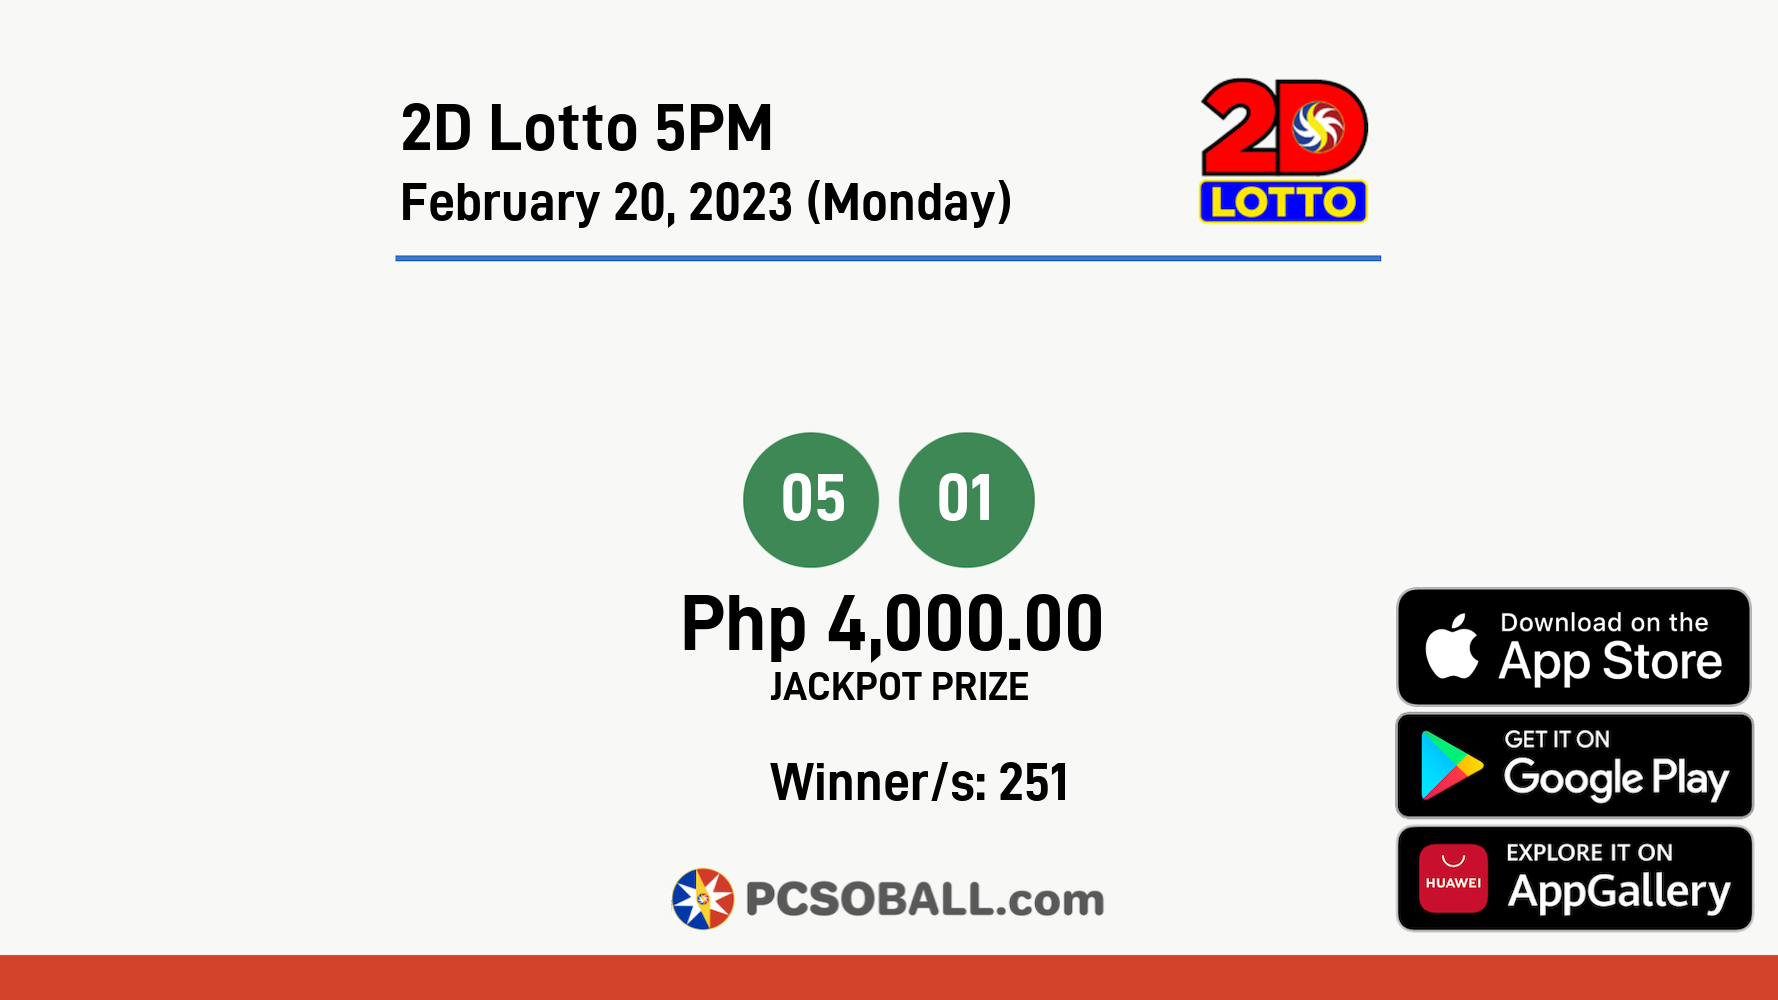 2D Lotto 5PM February 20, 2023 (Monday) Result